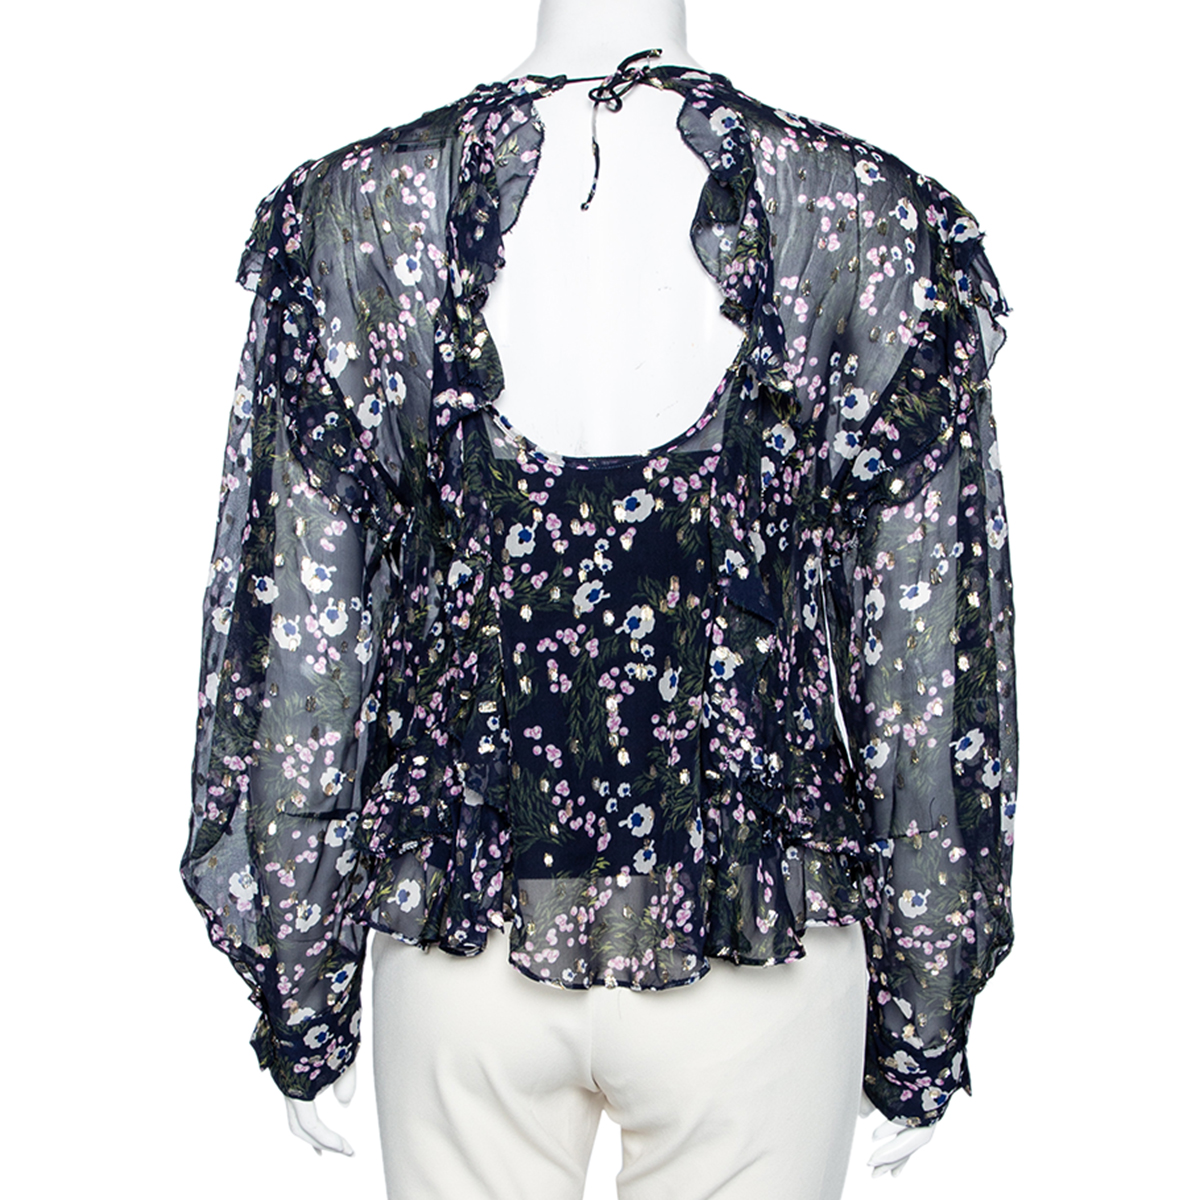 Isabel Marant Navy Blue Floral Printed Silk & Lurex Ruffle Trimmed Blouse S